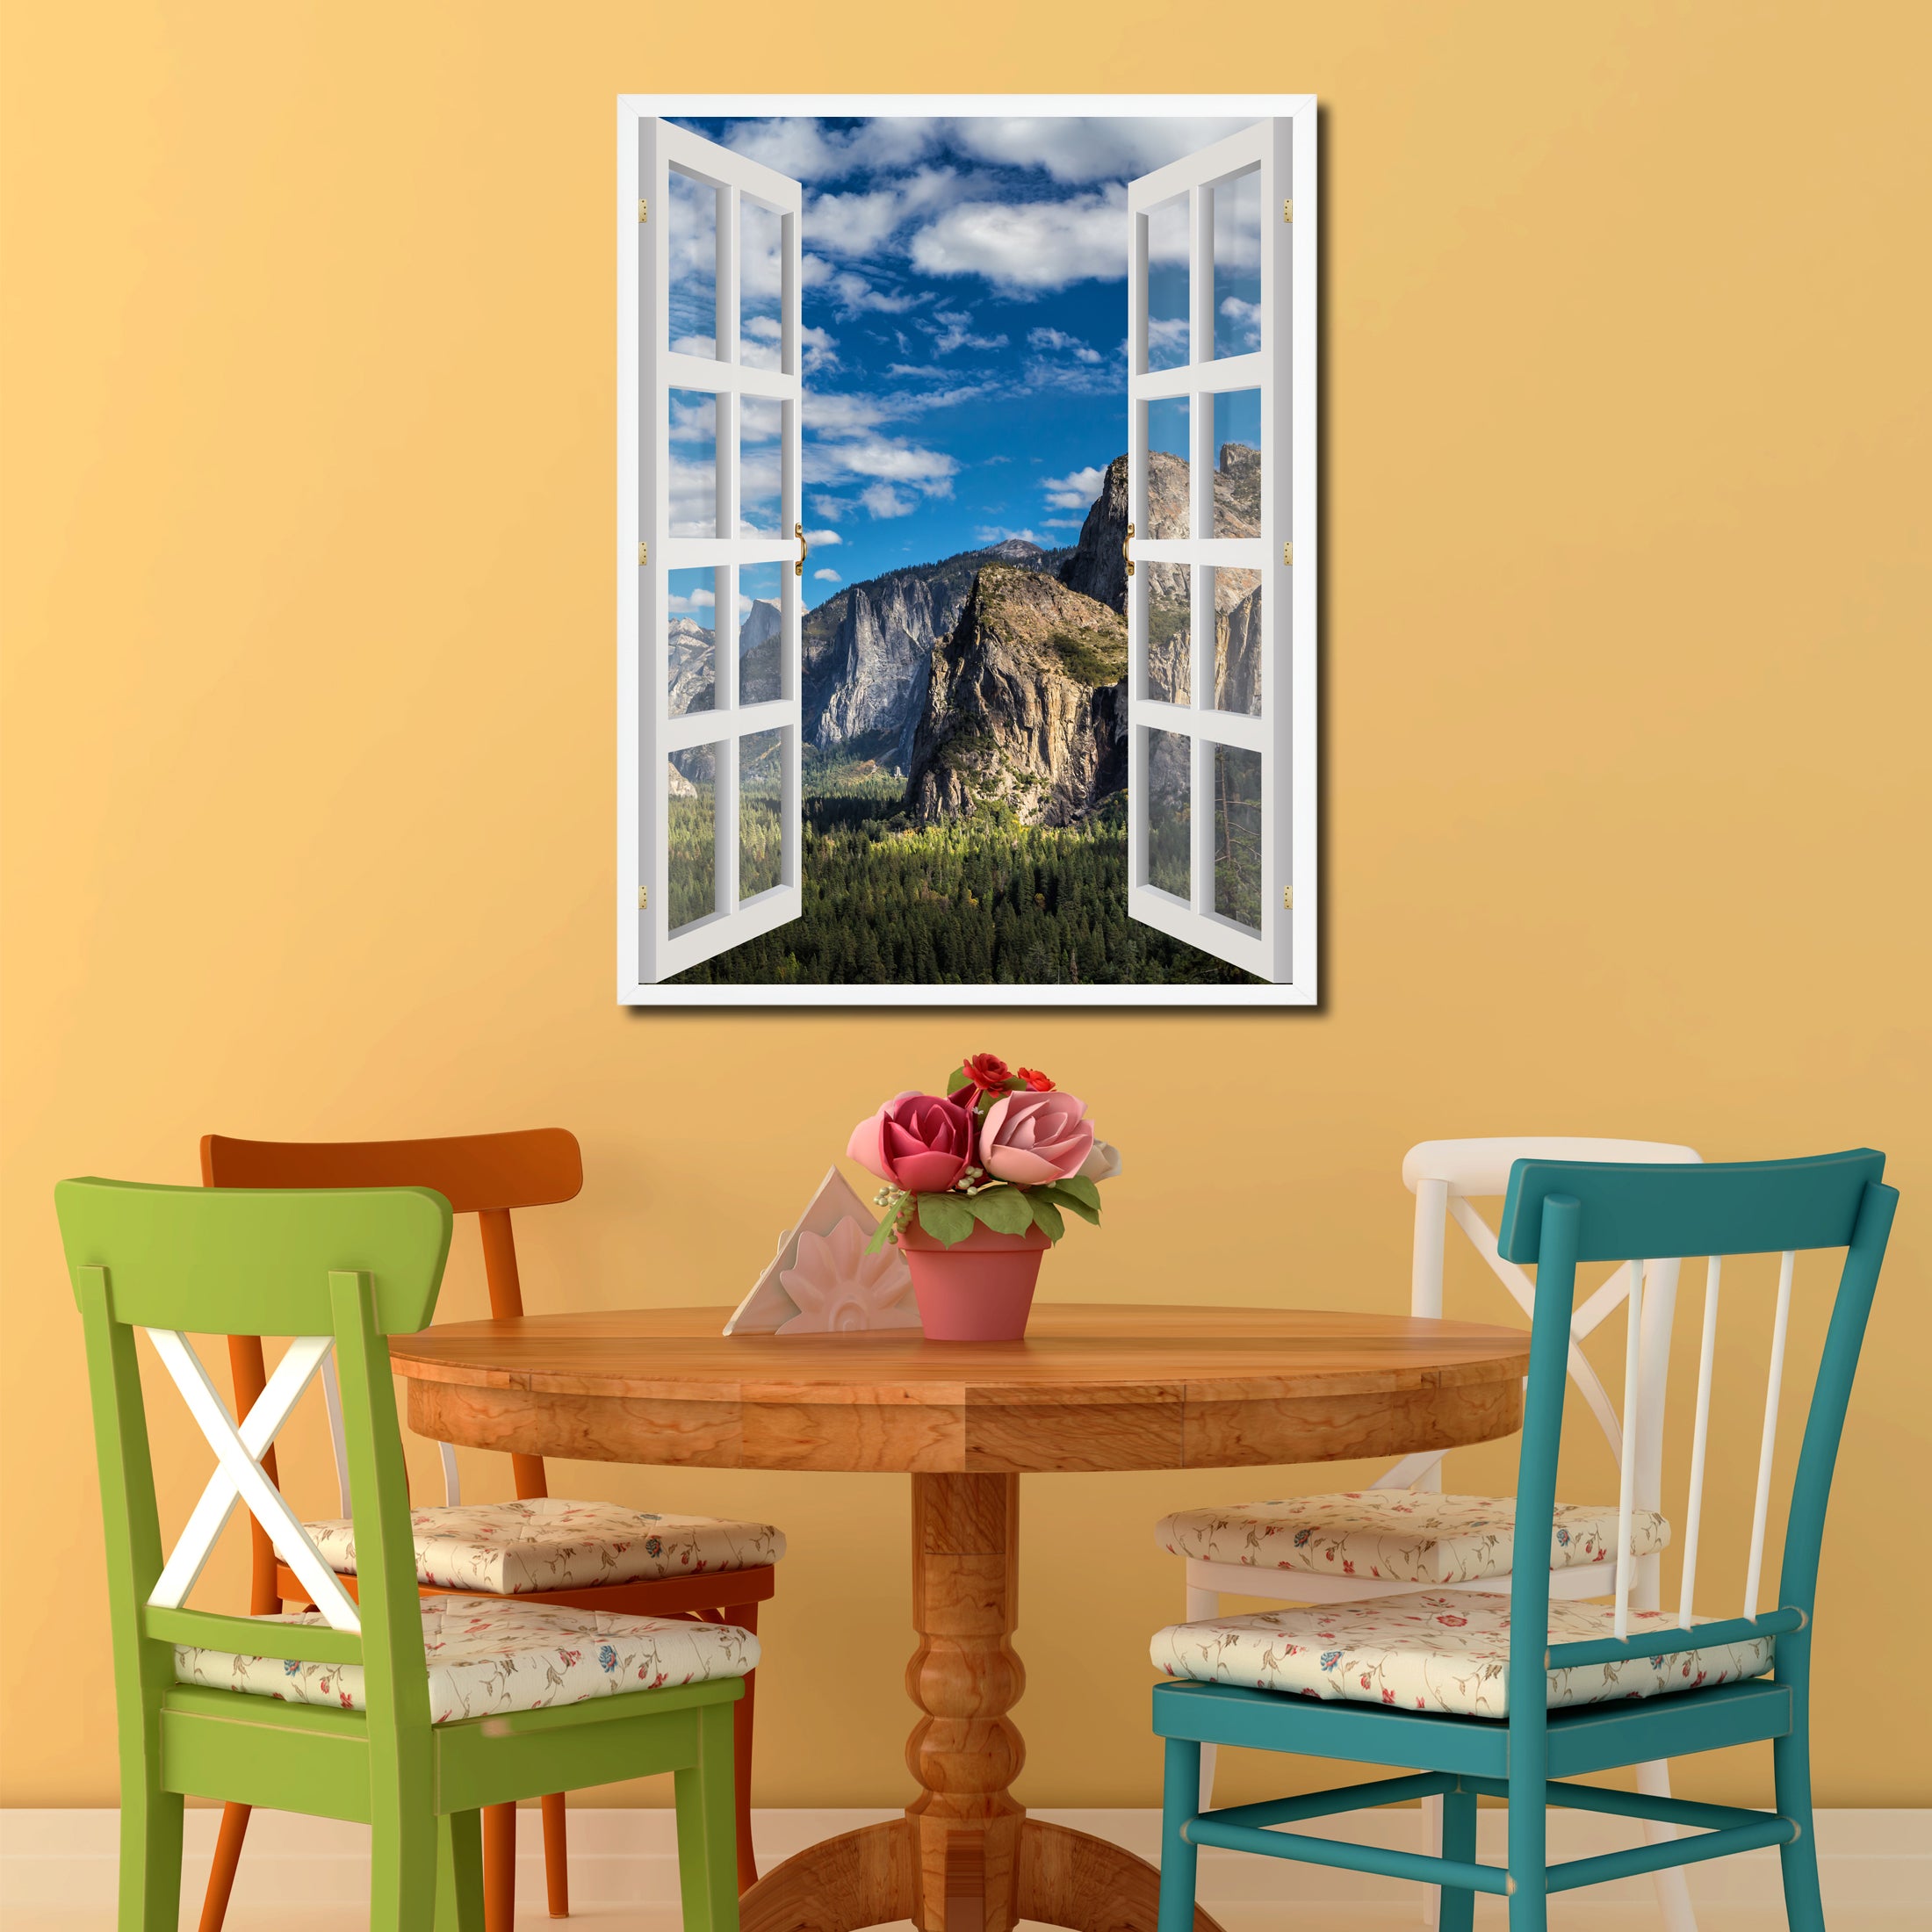 Tunnel View Yosemite National Park California Picture French Window Canvas Print with Frame Gifts Home Decor Wall Art Collection